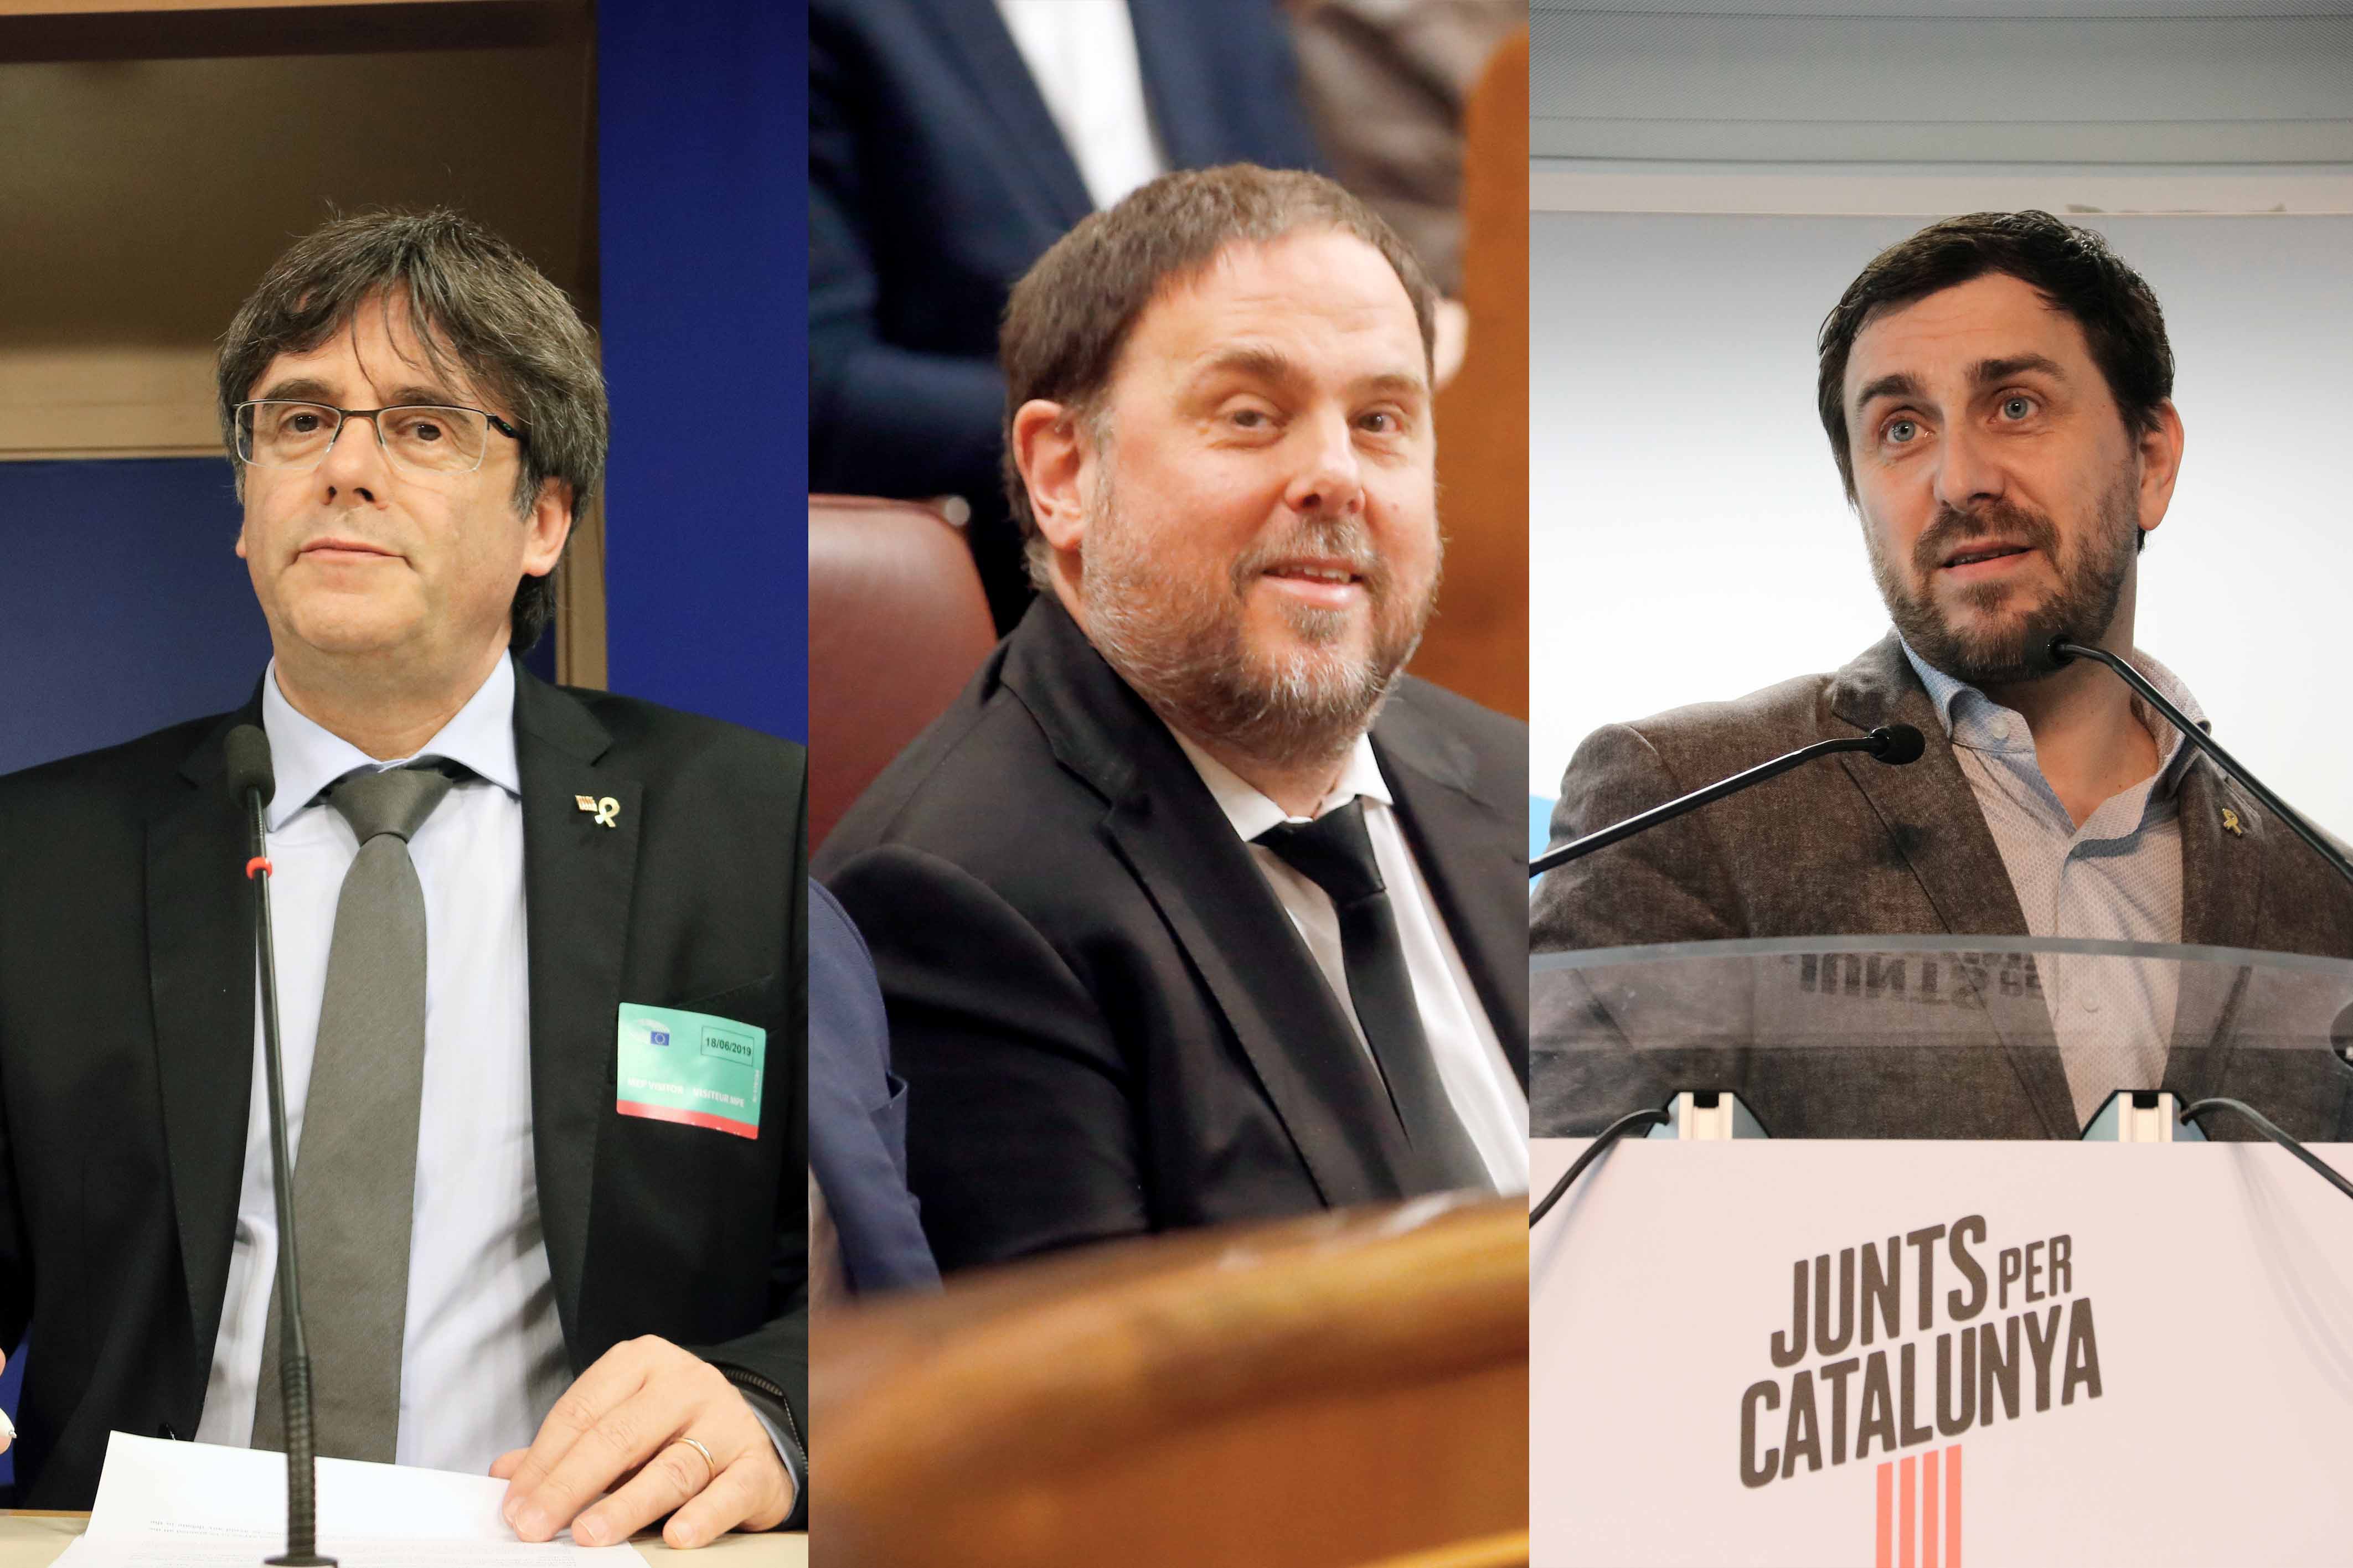 Carles Puigdemont, Oriol Junqueras, and Toni Comín (by ACN)